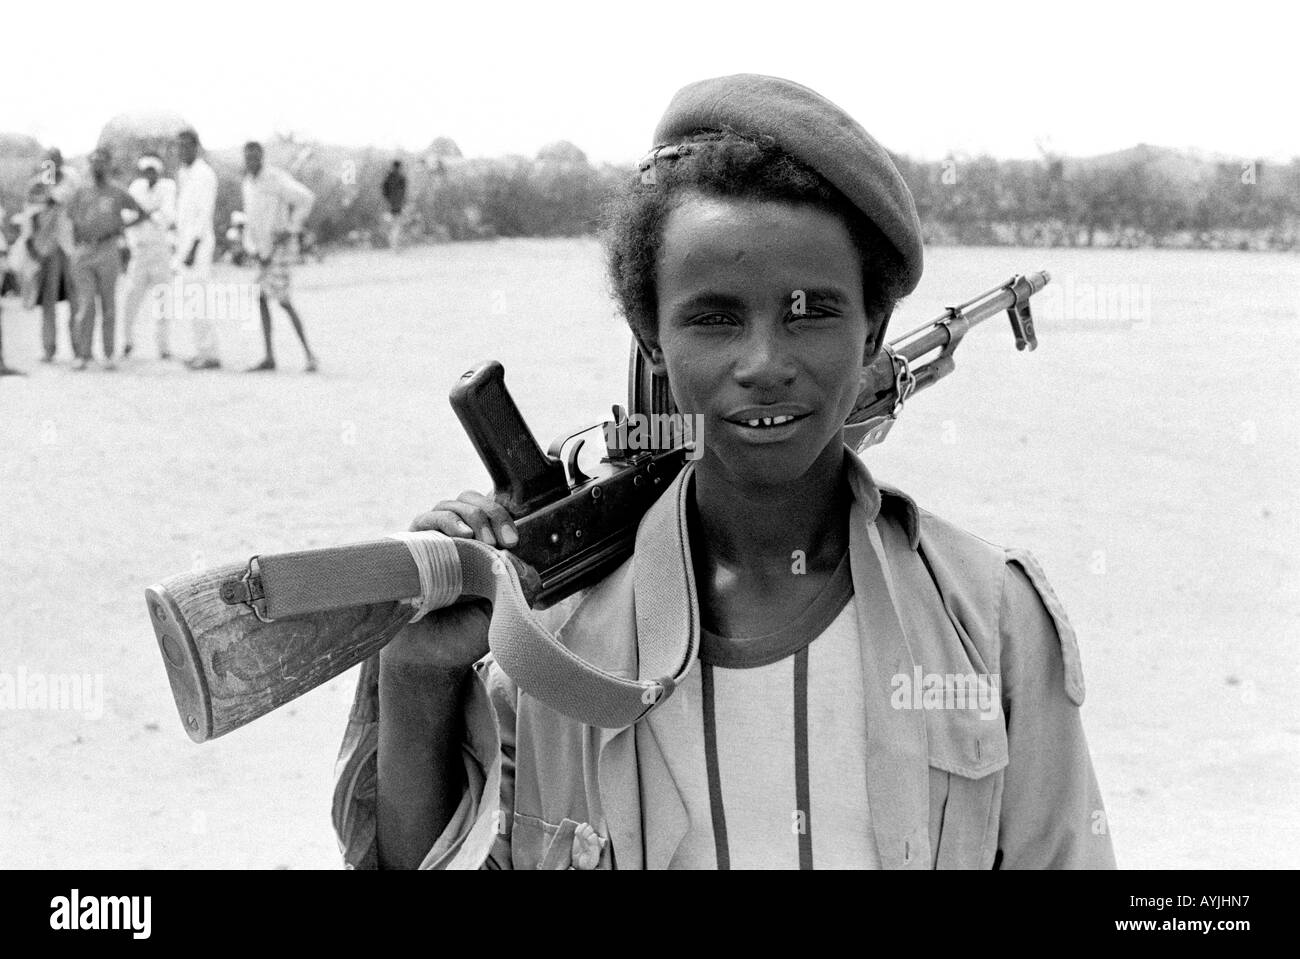 B/W of a casual, TPLF soldier with kalashnikov, a border force guarding food aid for refugees near the border with Somalia. Kebrebeyah, Ethiopia Stock Photo